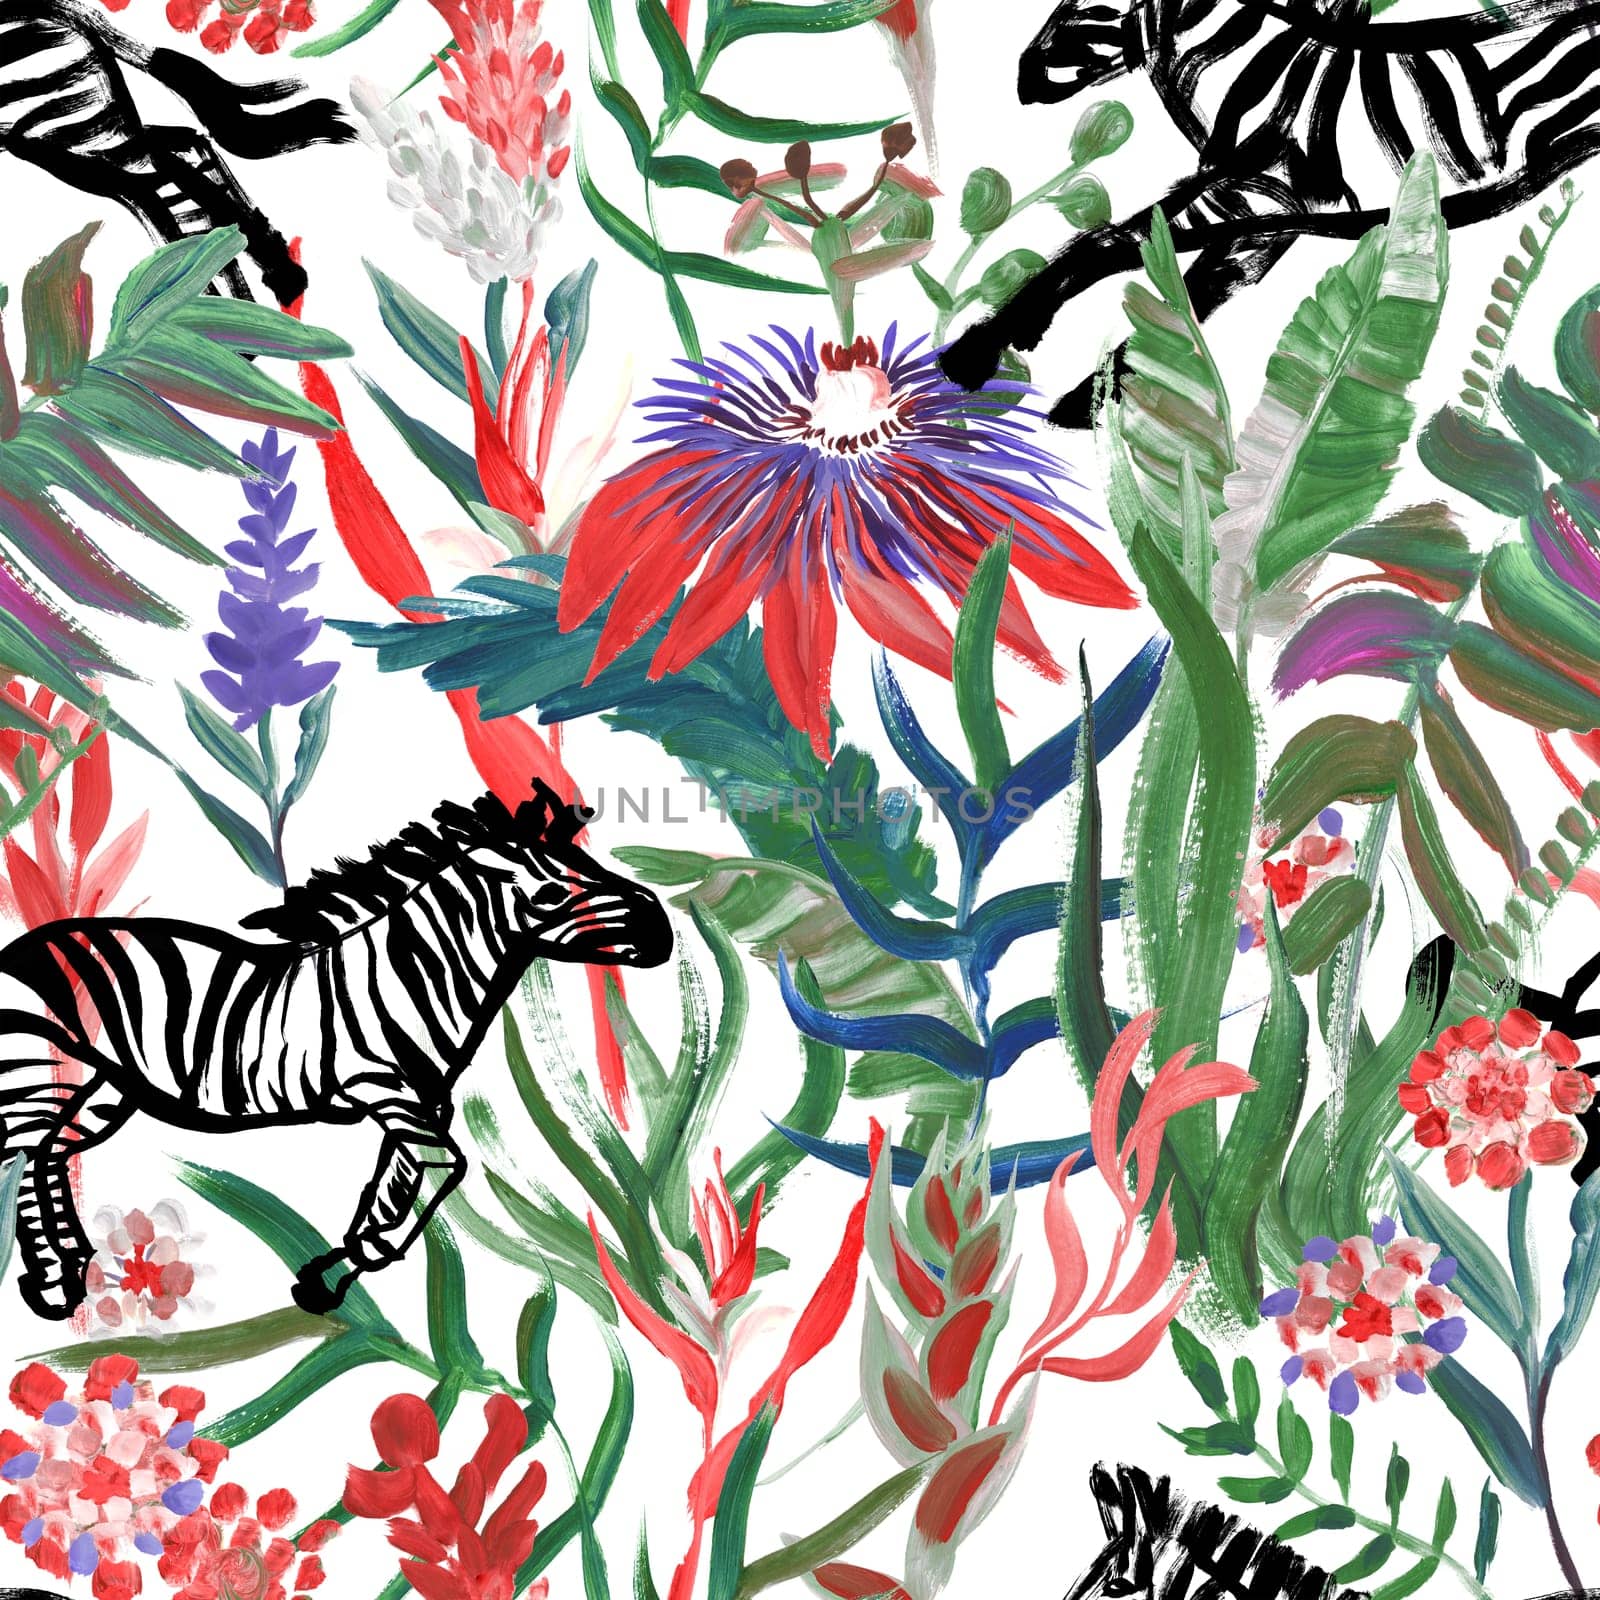 Seamless pattern with running zebras and bright tropical flowers drawn in a painterly style by MarinaVoyush